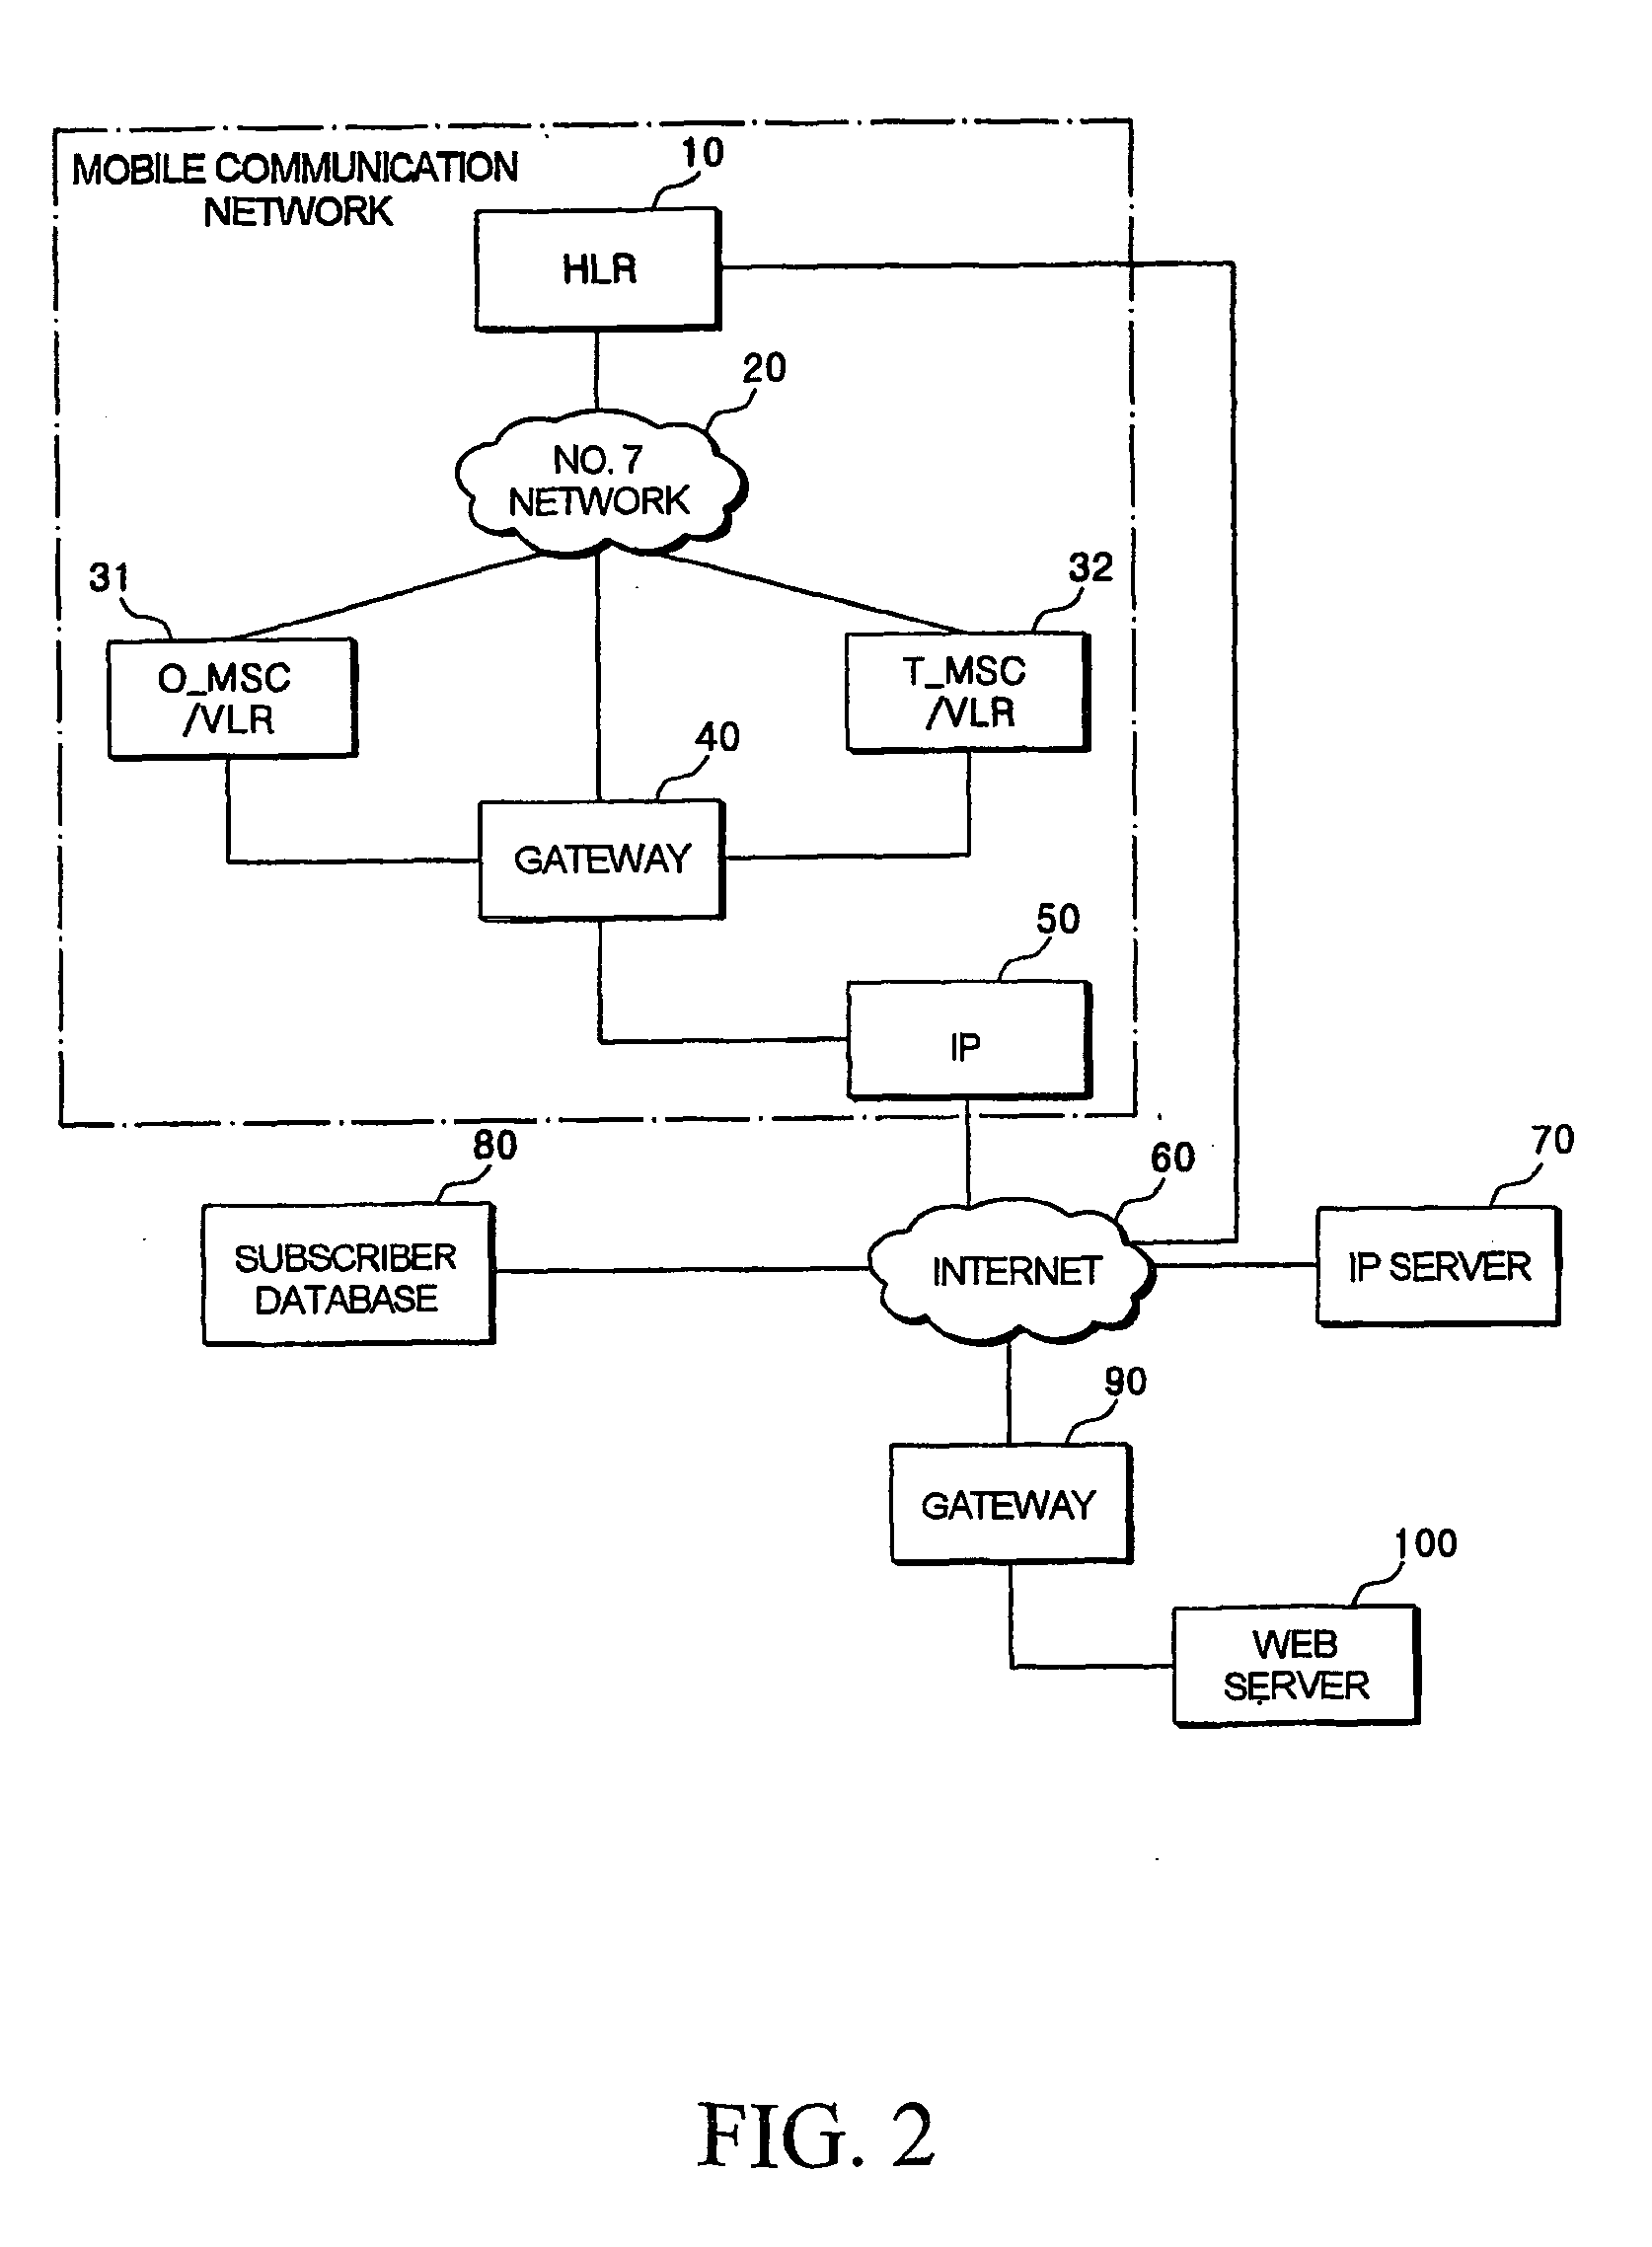 Method and apparatus for managing presenting and changing ring-back sounds in subscriber-based ring-back sound service